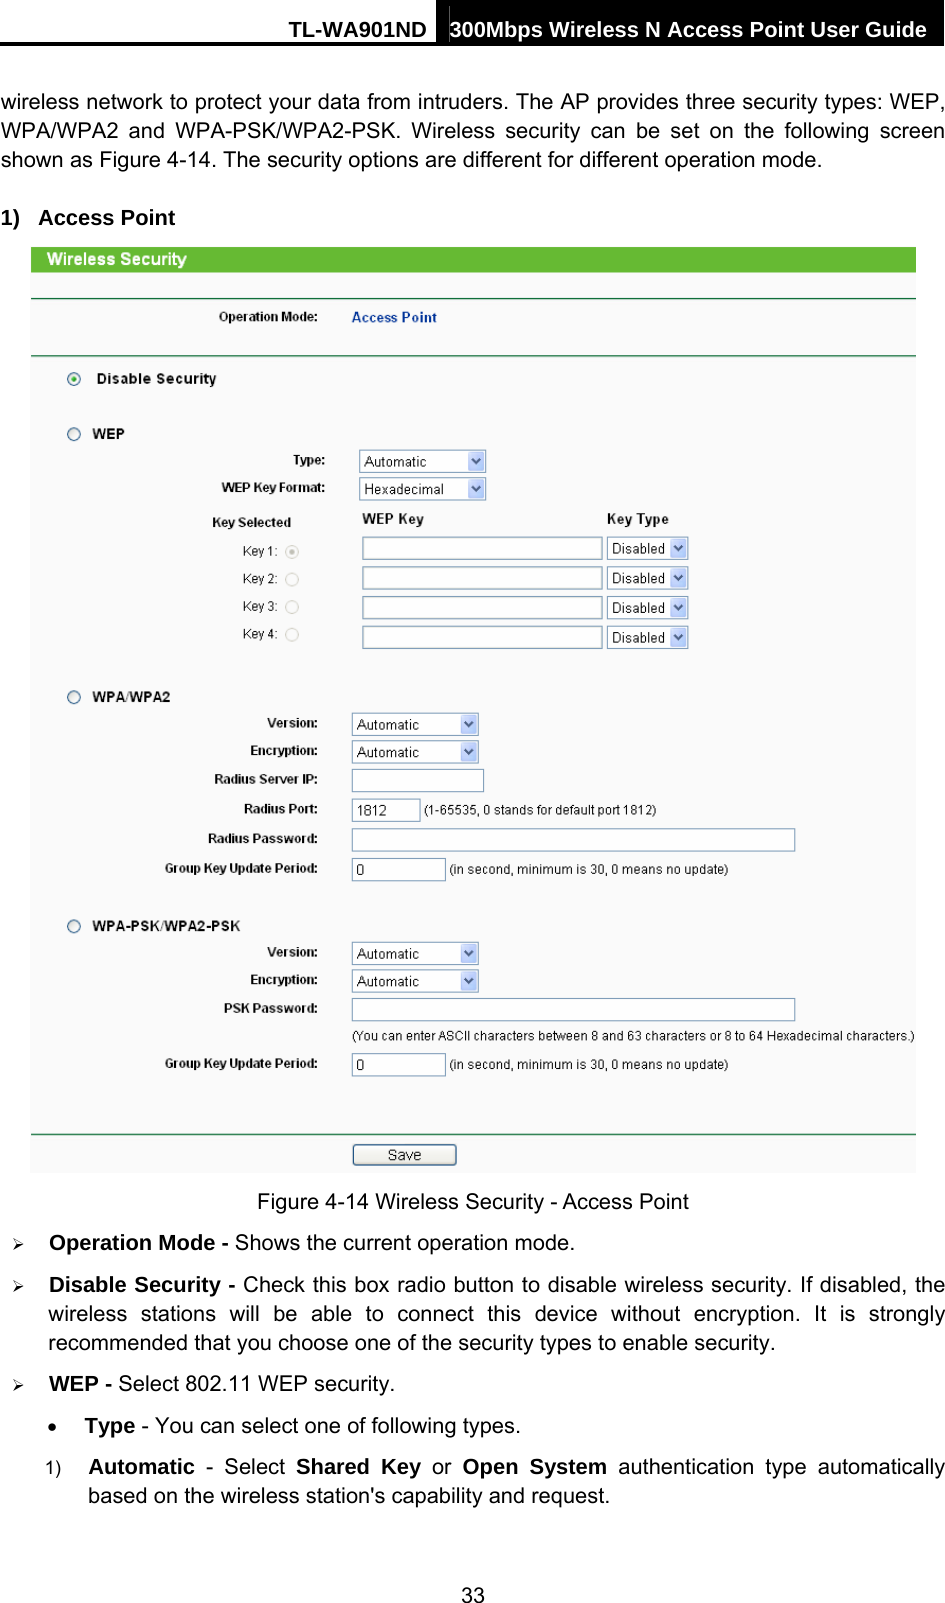 TL-WA901ND 300Mbps Wireless N Access Point User Guide wireless network to protect your data from intruders. The AP provides three security types: WEP, WPA/WPA2 and WPA-PSK/WPA2-PSK. Wireless security can be set on the following screen shown as Figure 4-14. The security options are different for different operation mode.   1) Access Point  Figure 4-14 Wireless Security - Access Point ¾ Operation Mode - Shows the current operation mode.   ¾ Disable Security - Check this box radio button to disable wireless security. If disabled, the wireless stations will be able to connect this device without encryption. It is strongly recommended that you choose one of the security types to enable security.   ¾ WEP - Select 802.11 WEP security.   • Type - You can select one of following types. 1)  Automatic - Select Shared Key or Open System authentication type automatically based on the wireless station&apos;s capability and request.   33 